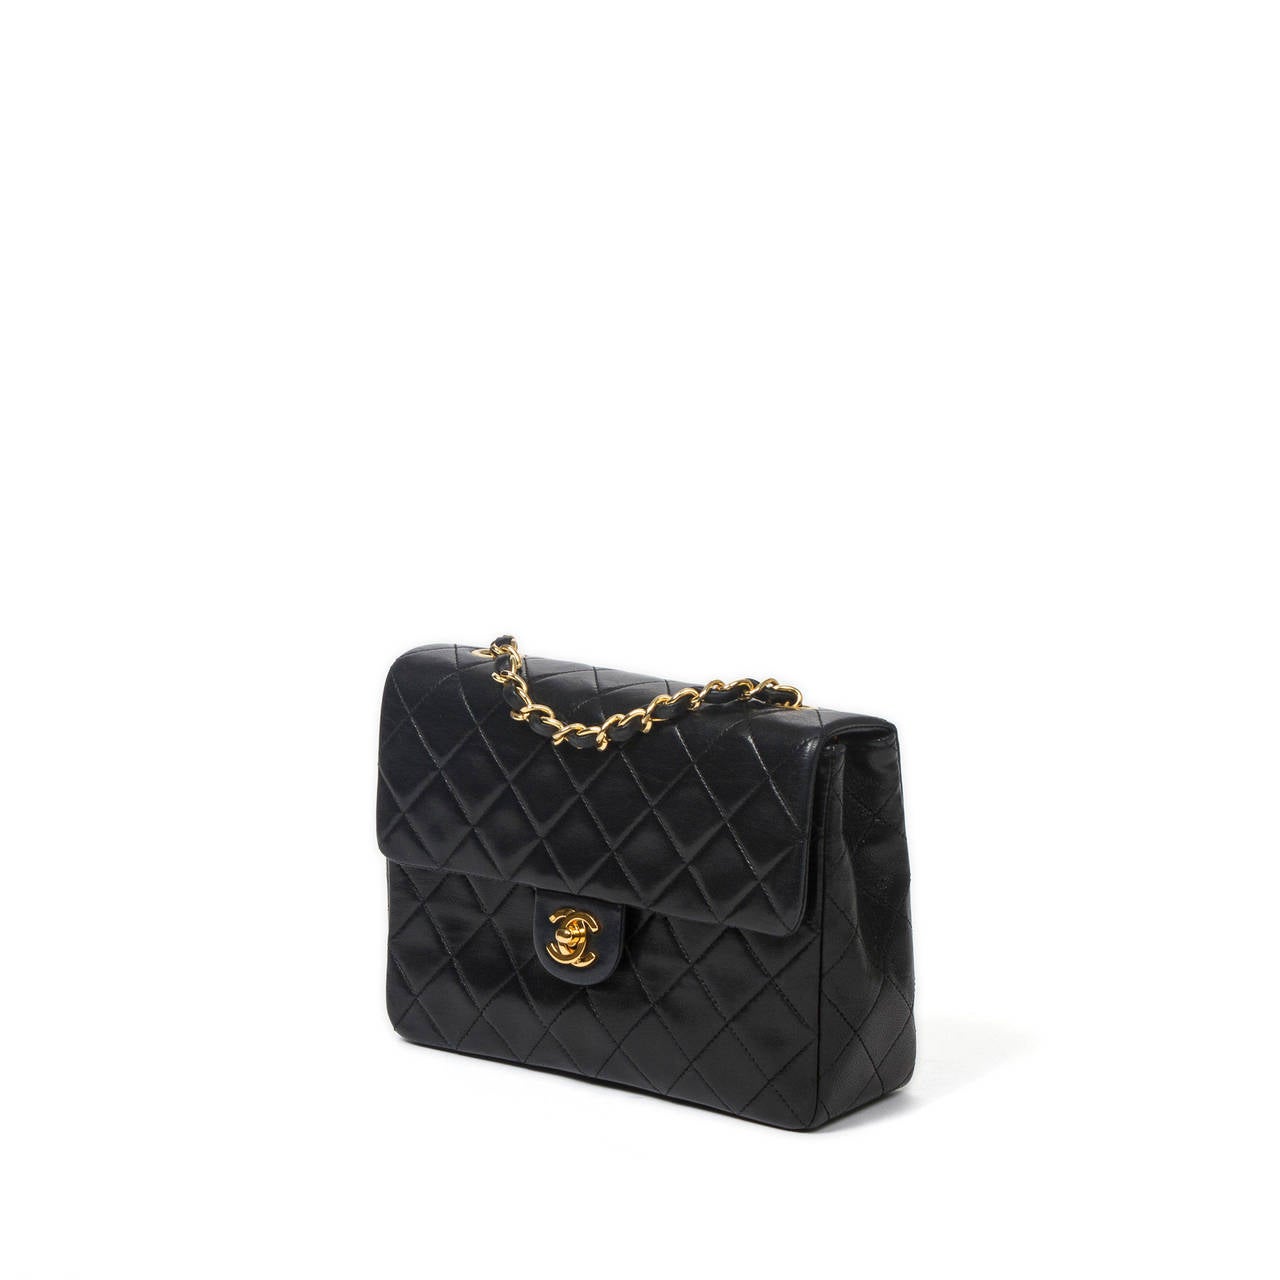 Chanel Mini classic single flap in black quilted leather. Chain strap intrelaced with black leather. Lined interior in burgundy leather with one zip pocket and one slip pocket. Gold tone hardware with 